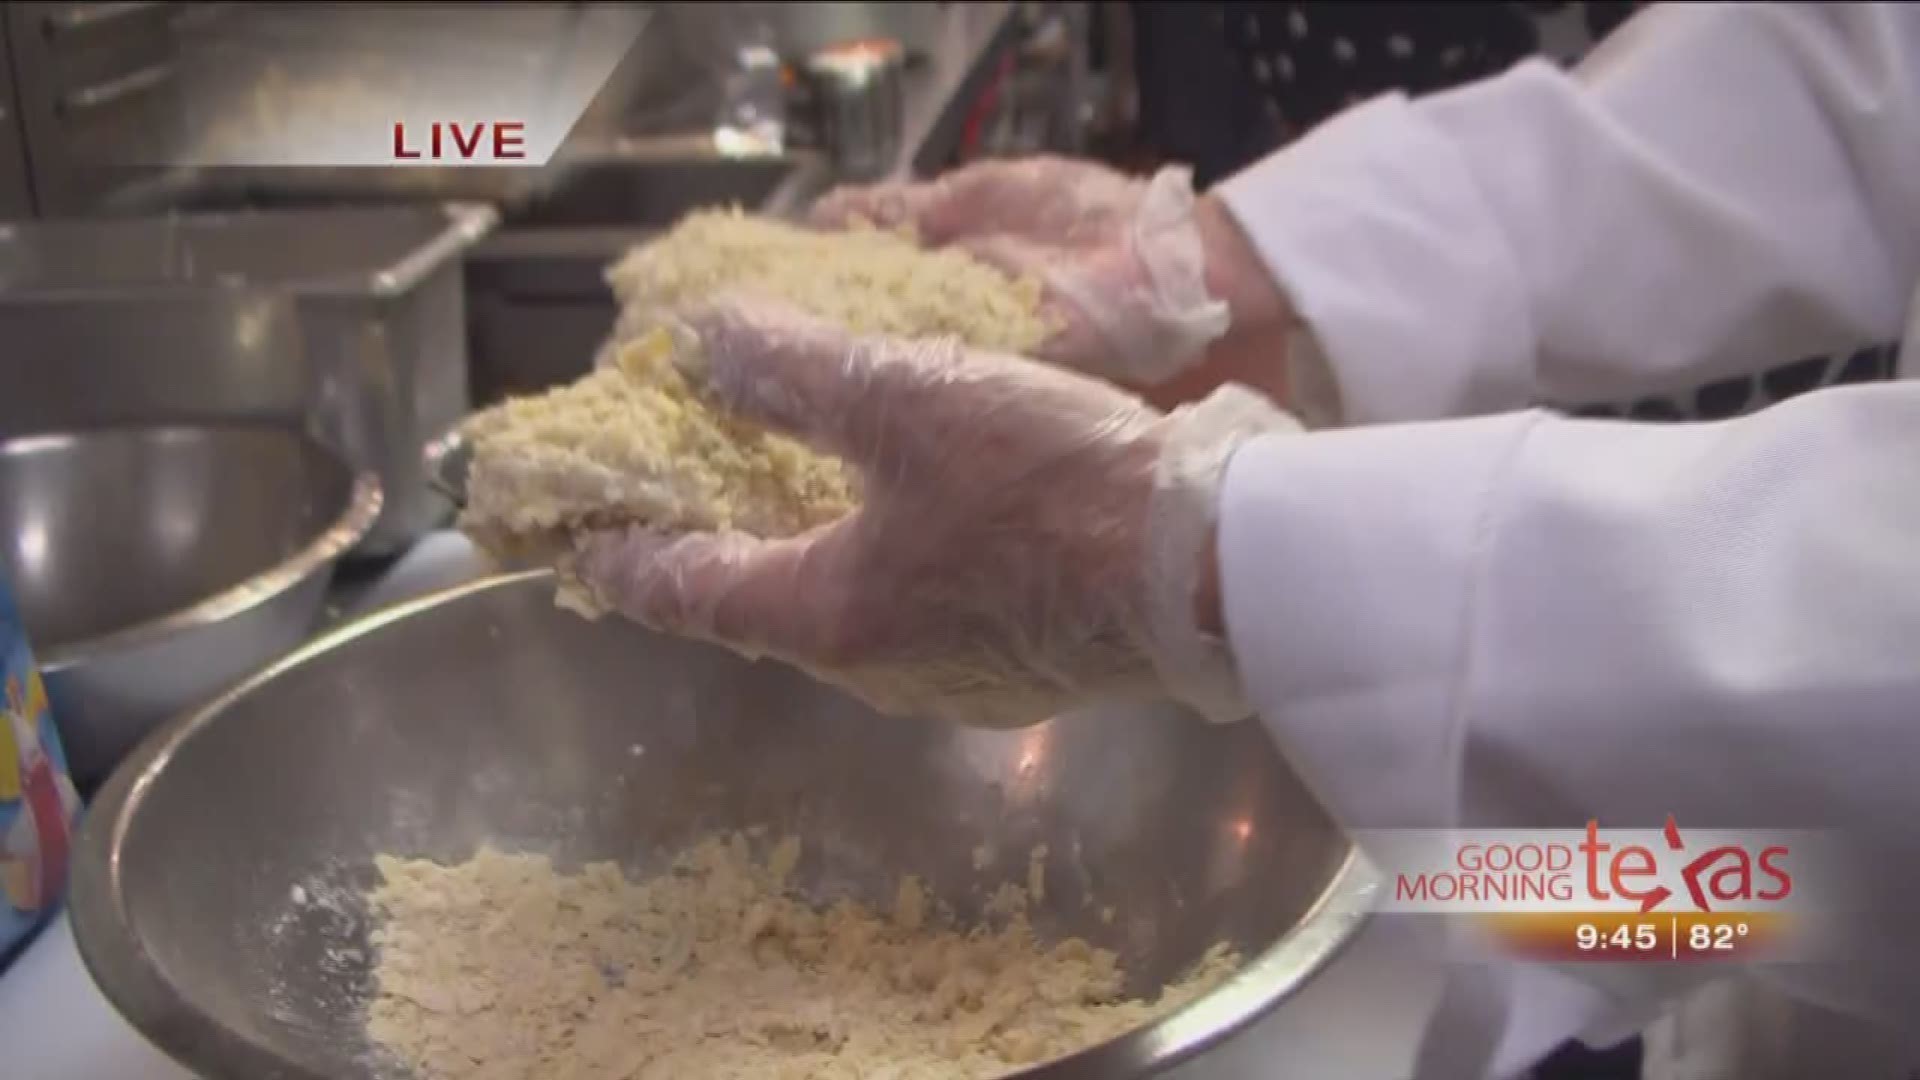 We go behind the scenes at the Maple Leaf Diner to check out their take on fish 'n chips.